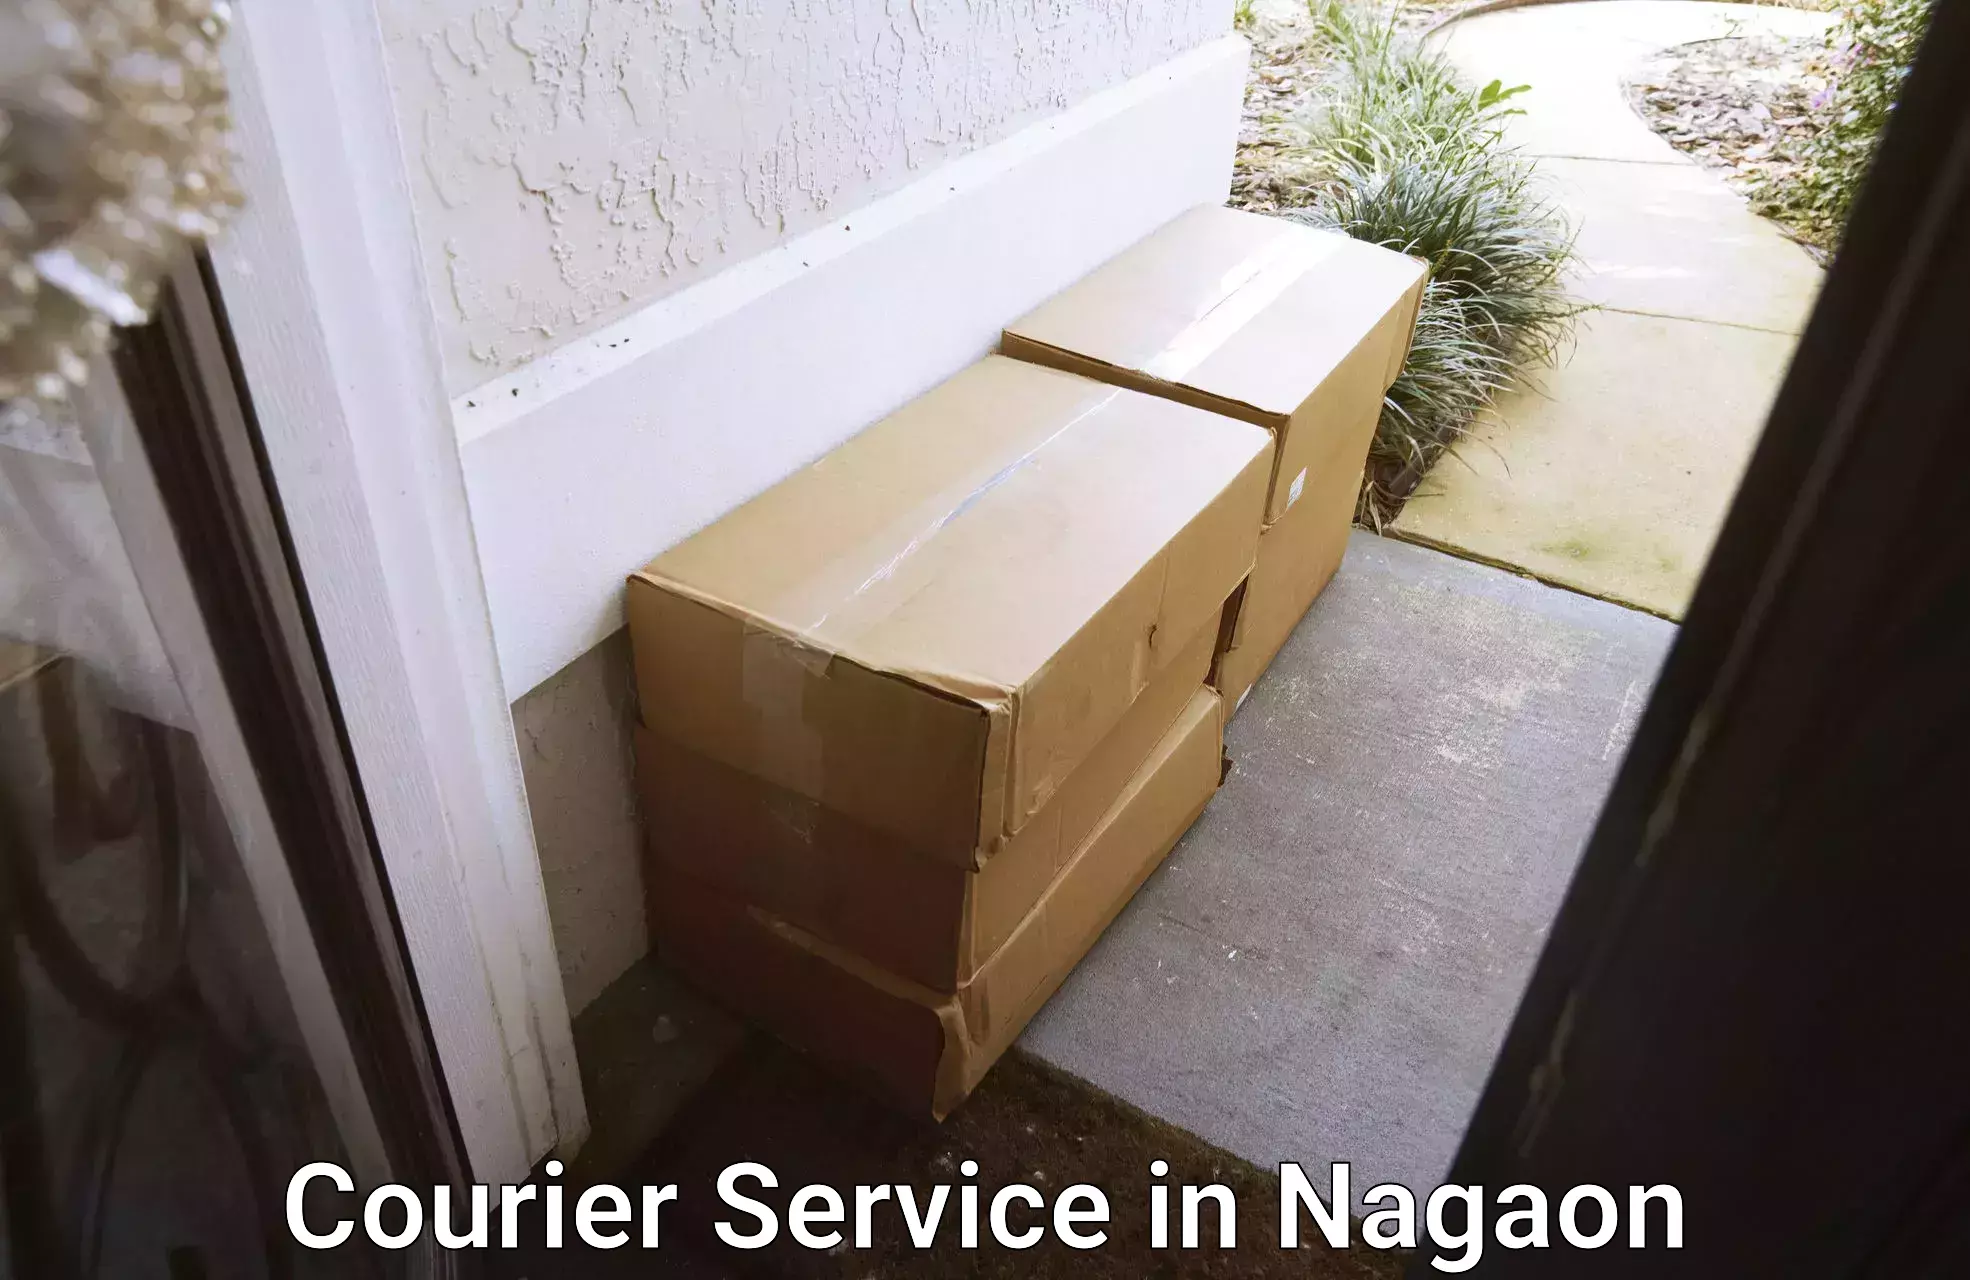 Fast shipping solutions in Nagaon